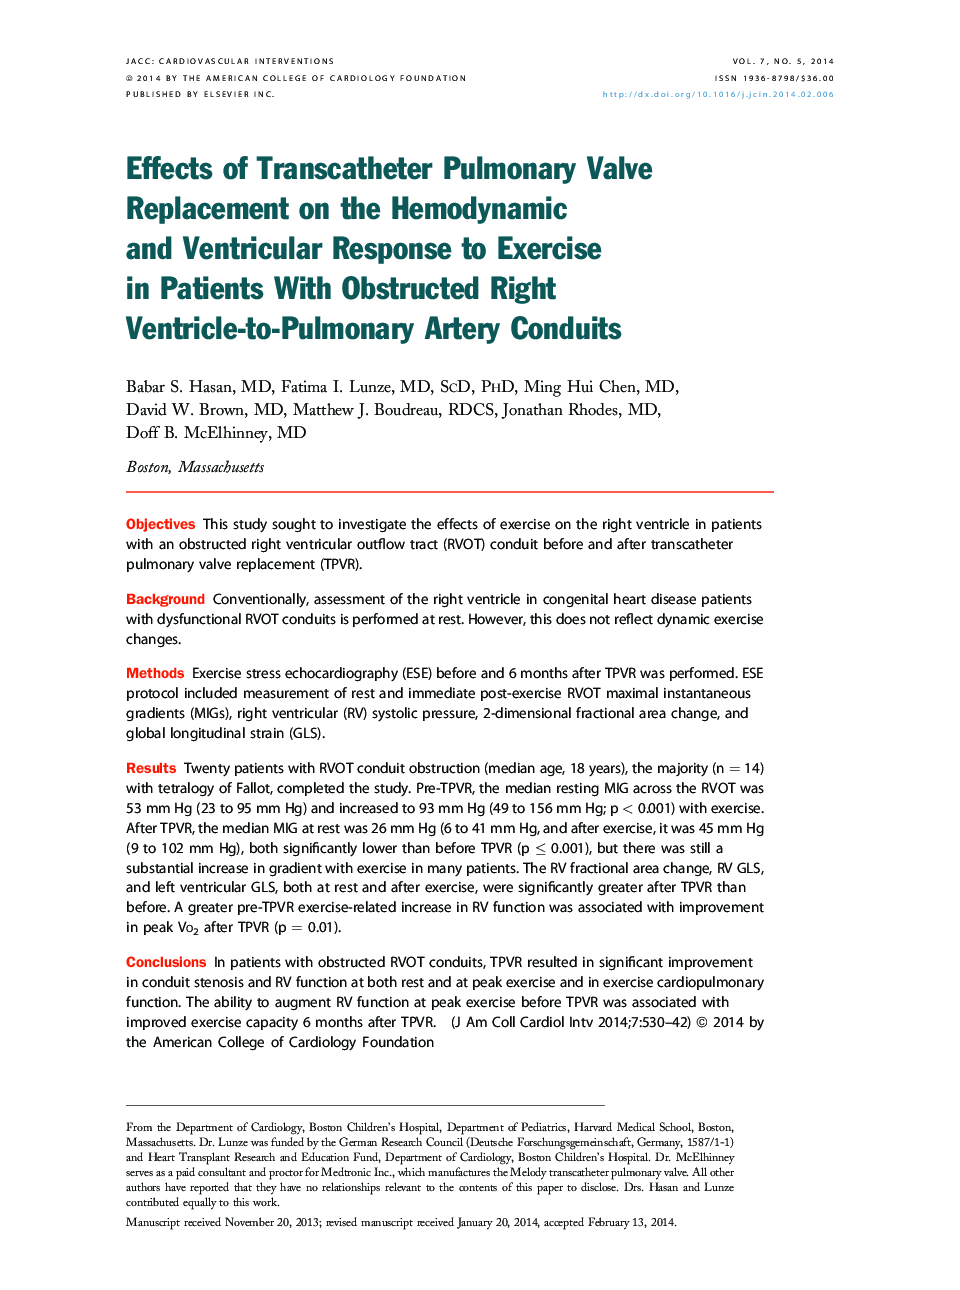 Effects of Transcatheter Pulmonary Valve Replacement on the Hemodynamic andÂ Ventricular Response to Exercise inÂ Patients With Obstructed Right Ventricle-to-Pulmonary Artery Conduits